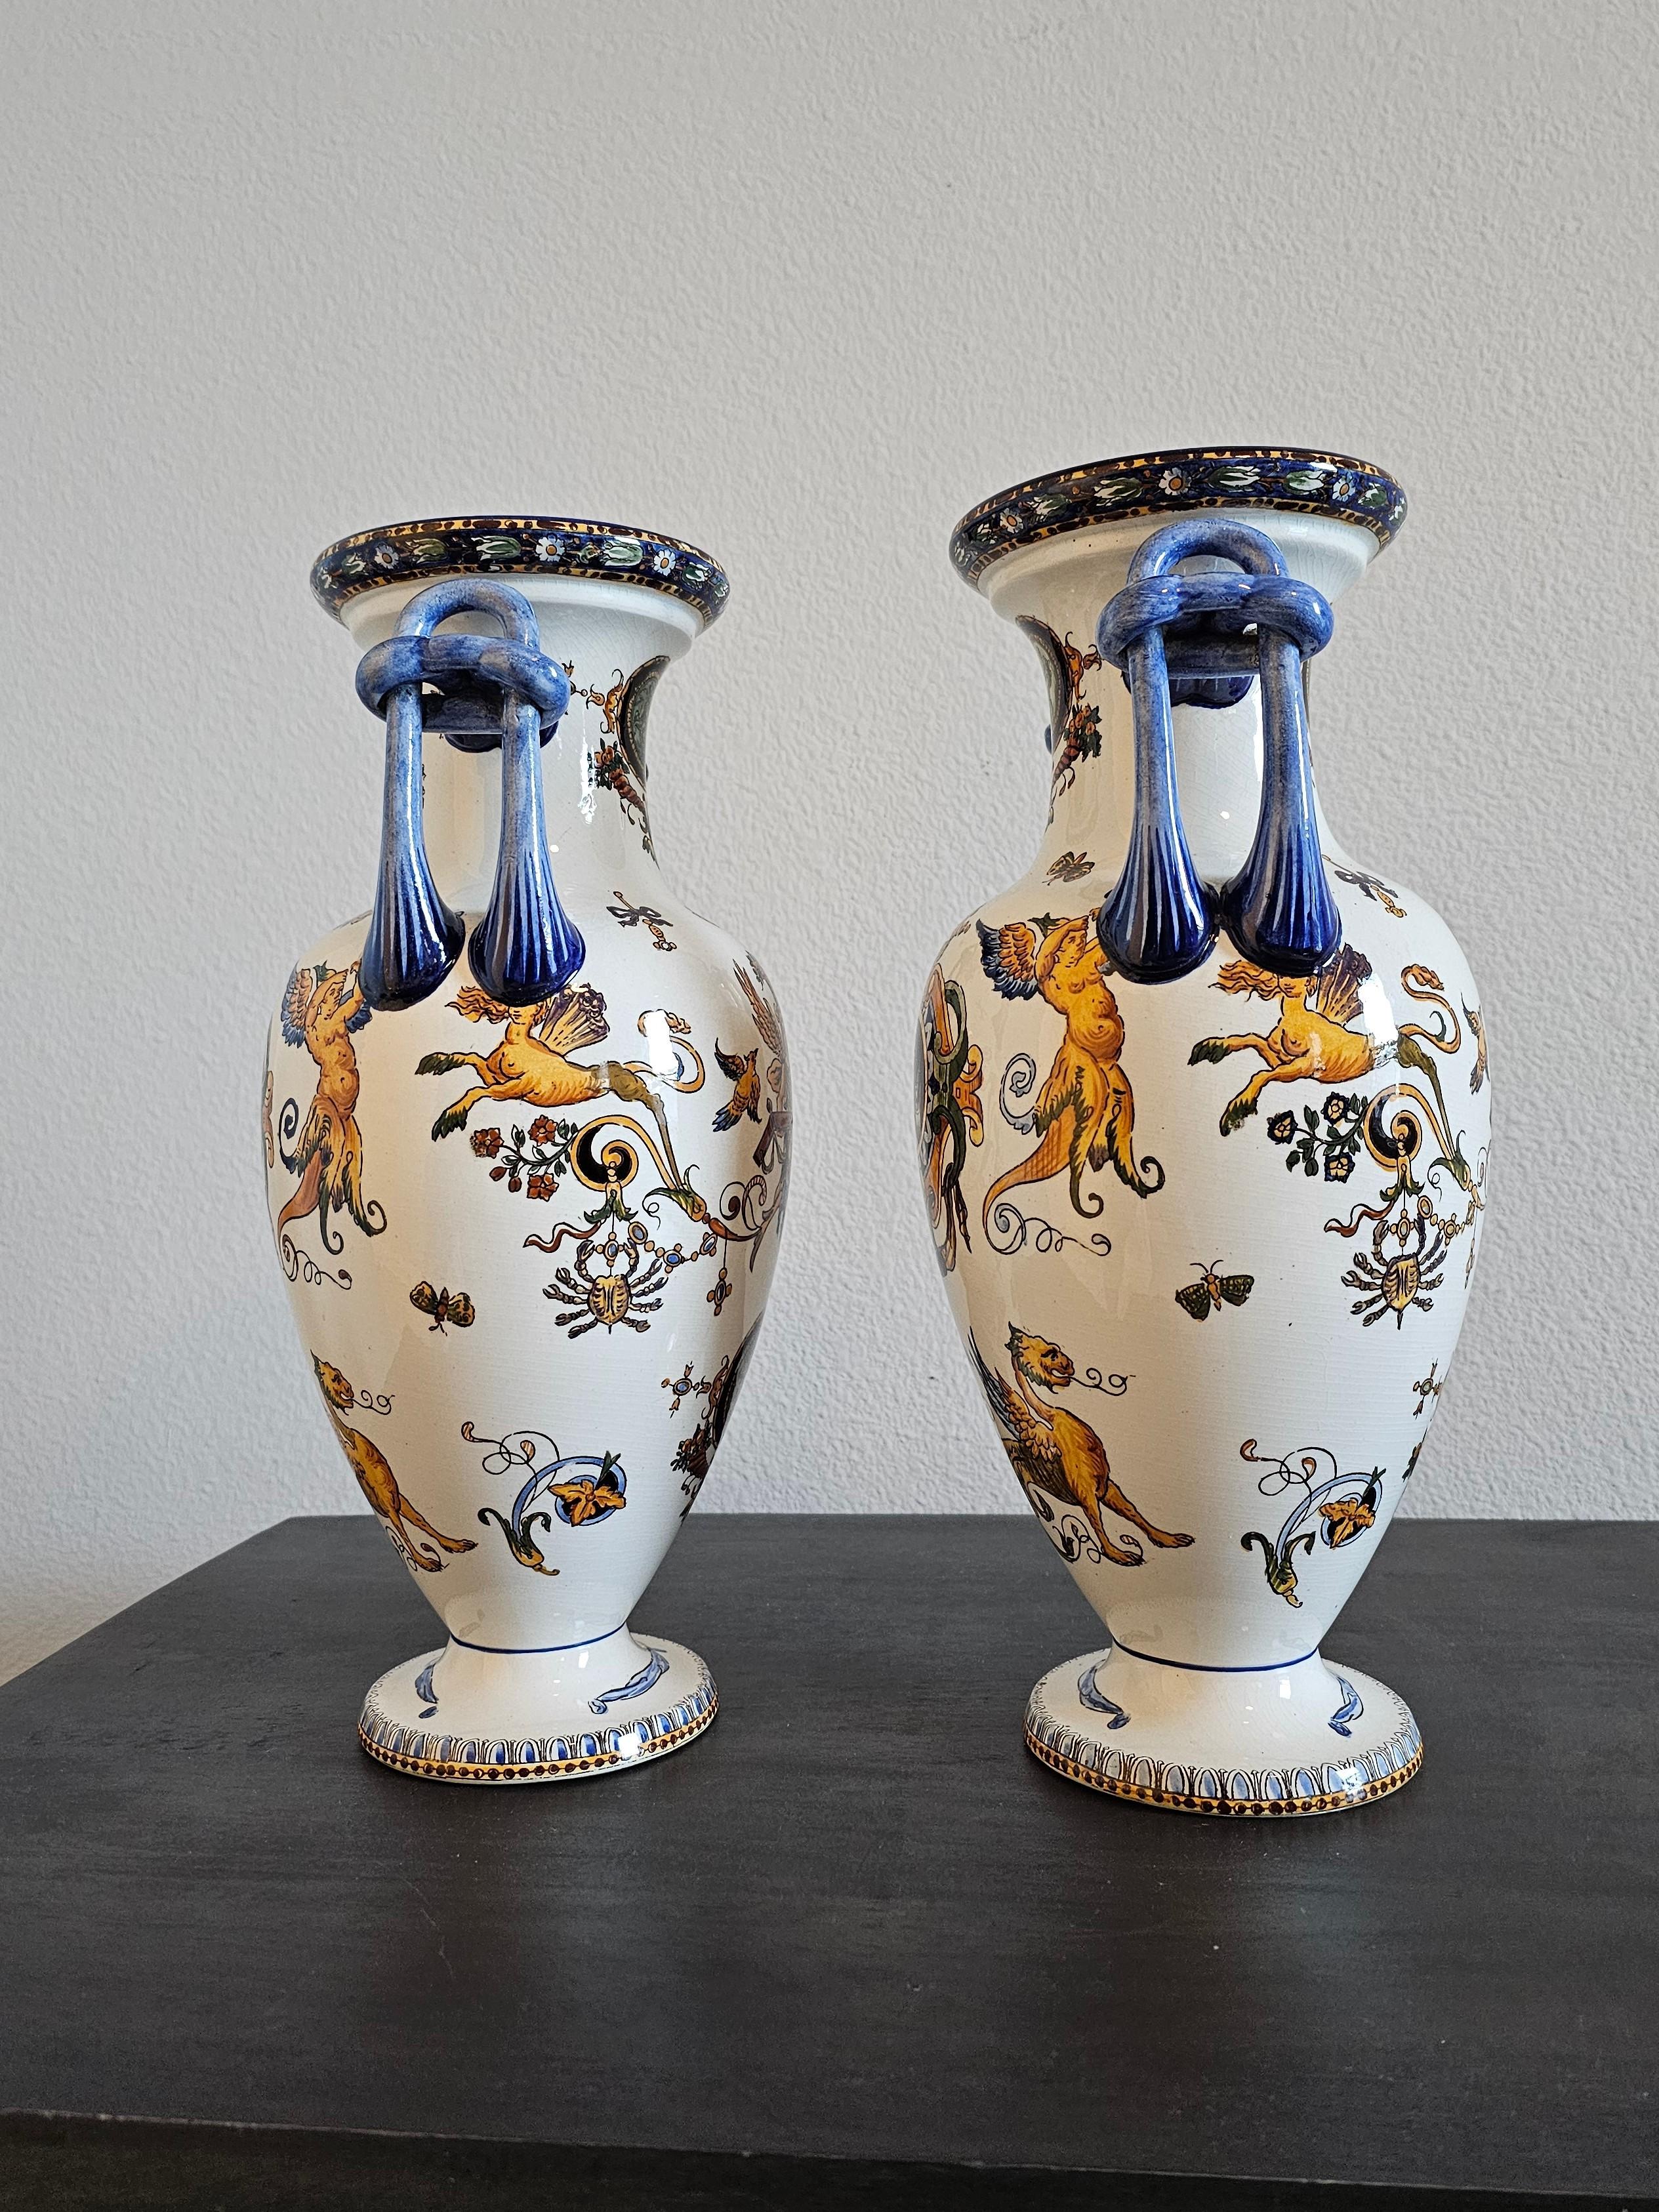 Pair of French Gien Fiance Renaissance Revival Ceramic Vases In Good Condition For Sale In Forney, TX